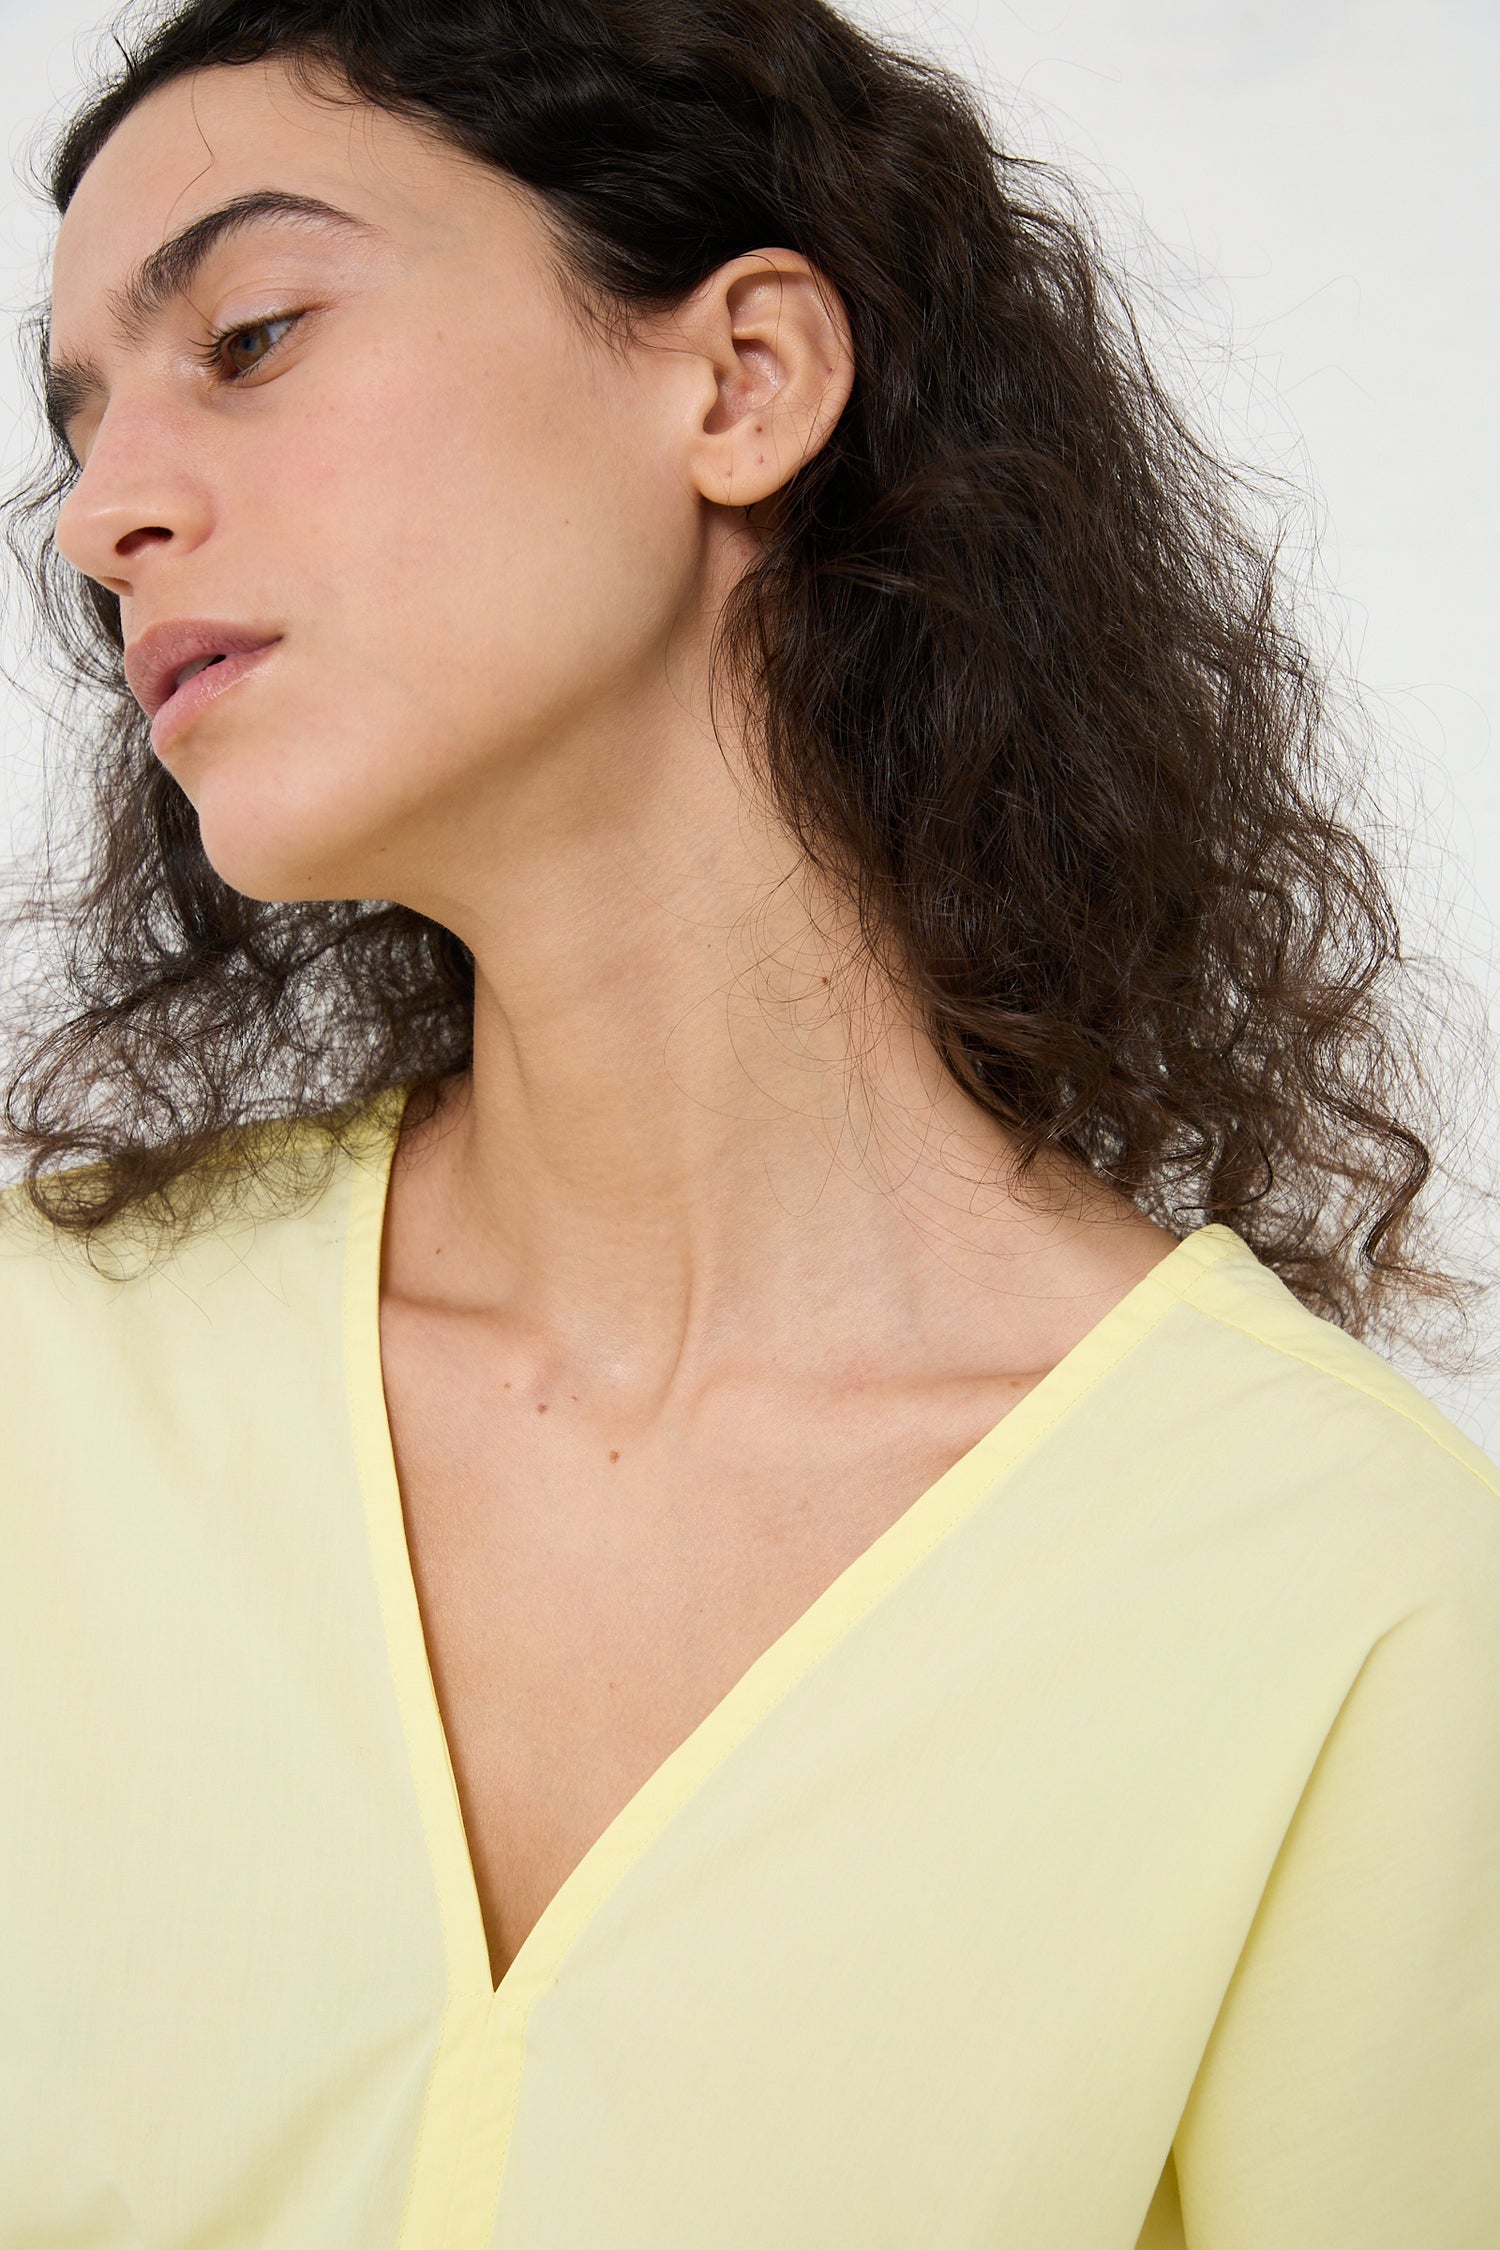 Woman in a Los Angeles fashion-inspired Black Crane Organic Cotton V-Neck Top in Lemon, viewed in profile.